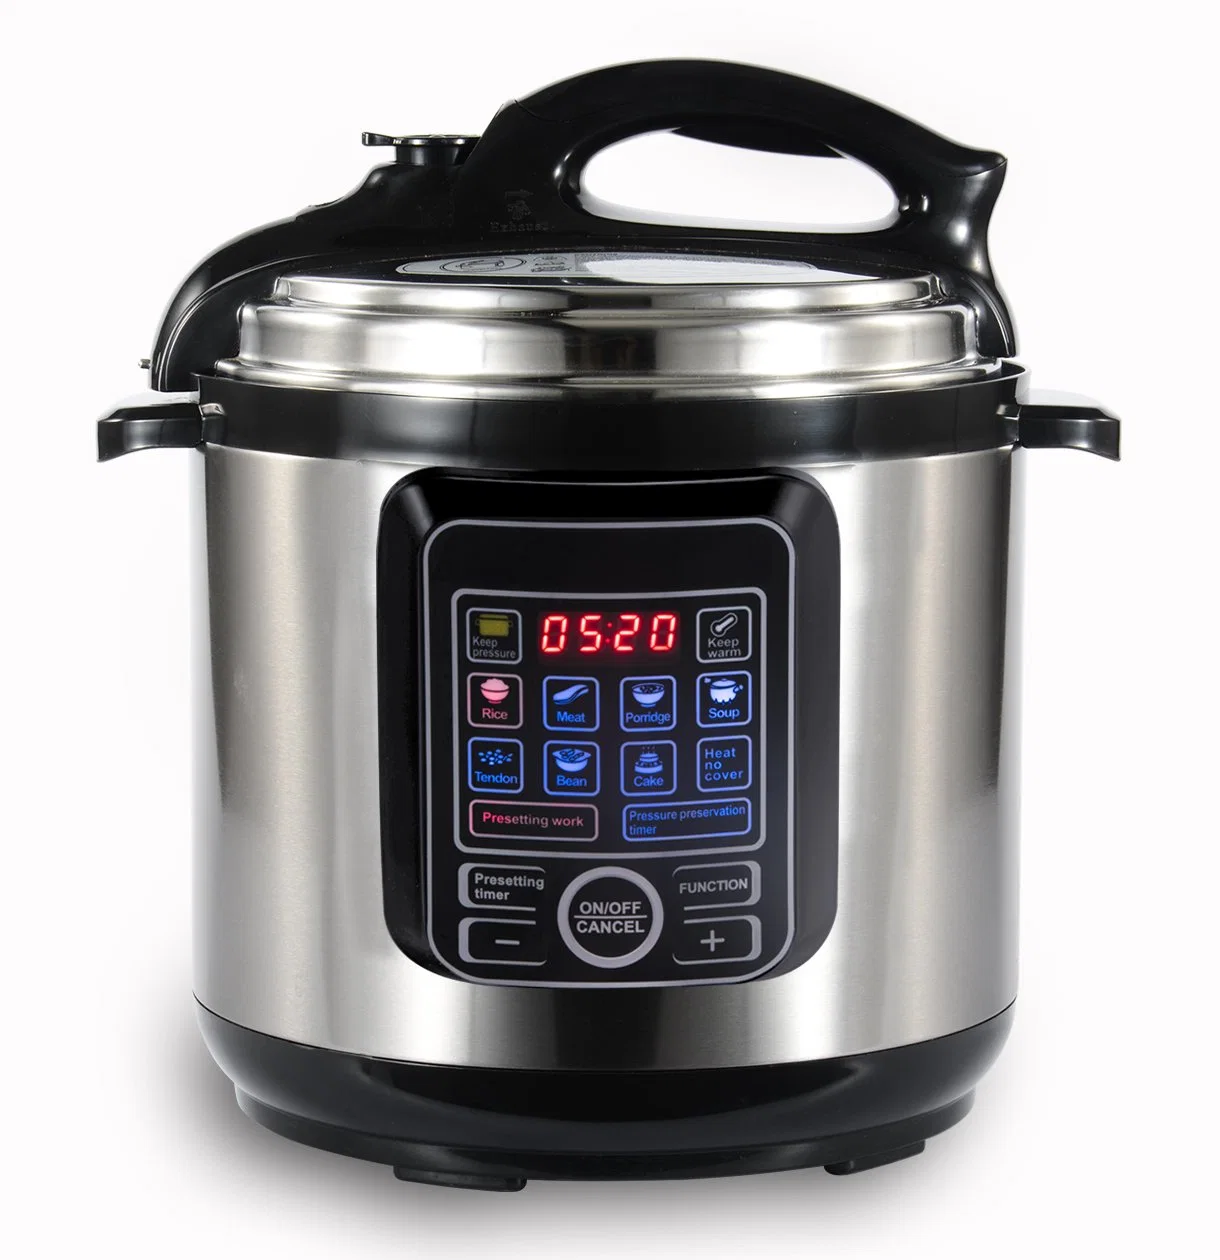 Multifunctional 6L Food Steamer Pressure Cooker Rice Cooker Electric Programmable Pot with Non-Stick Bowl